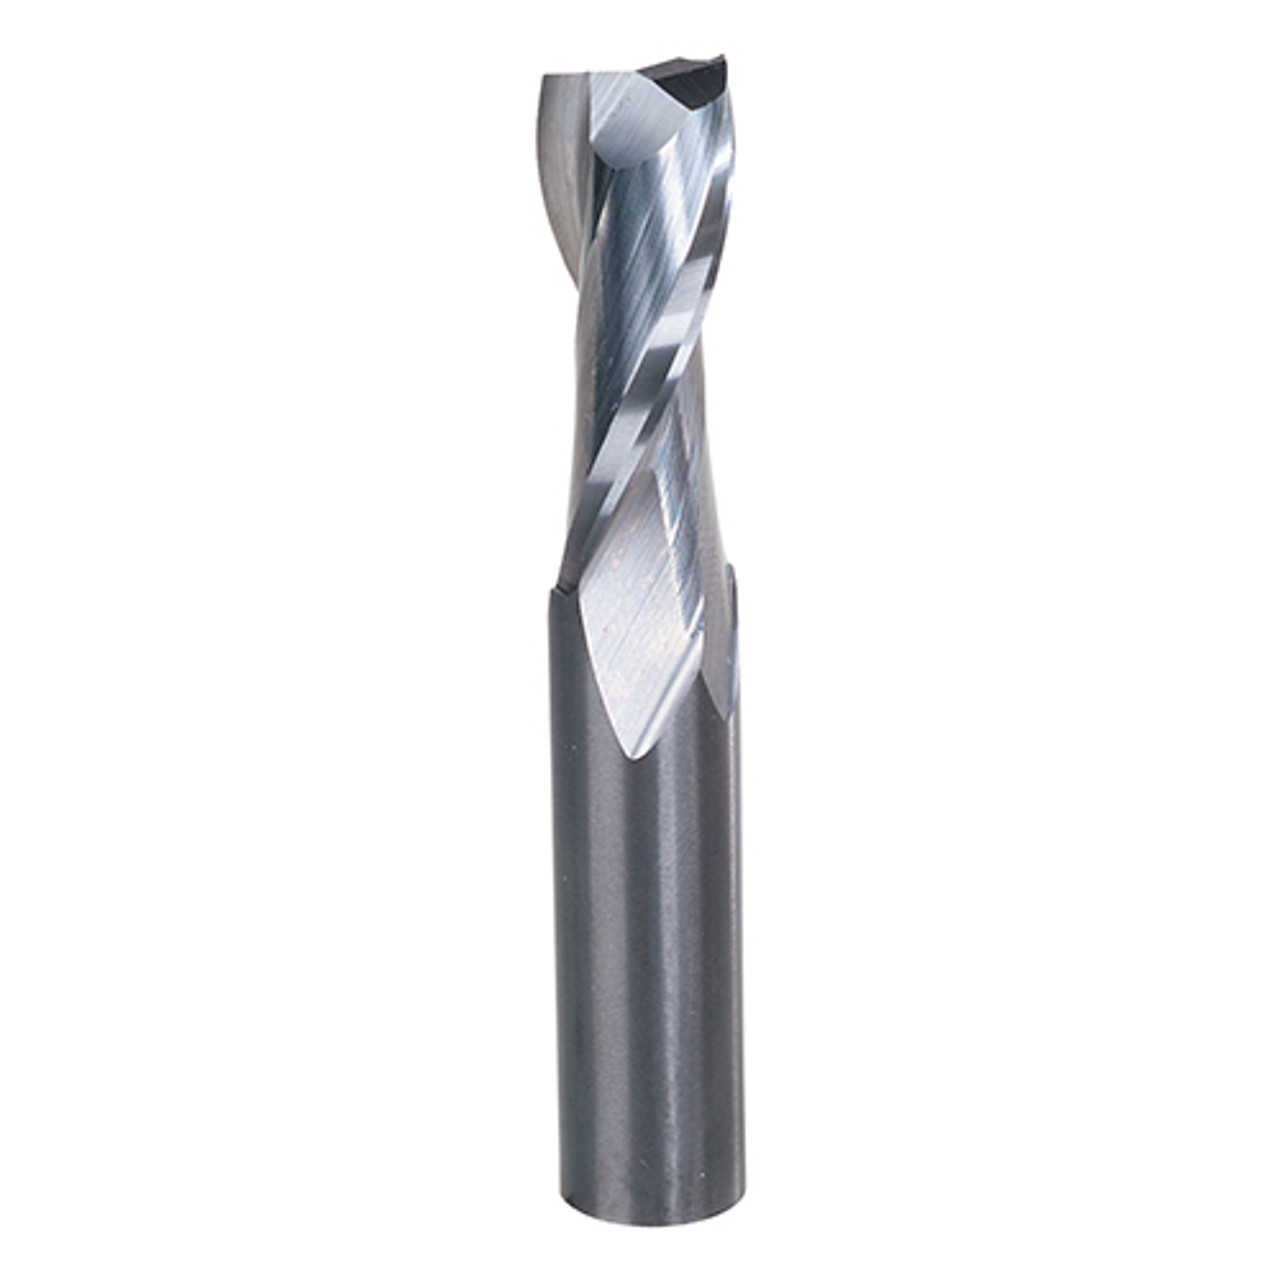 Freud 1/2" Up-Spiral Router Bit, 1-1/4" Carbide Height, 1/2" Shank, 3" Overall Length